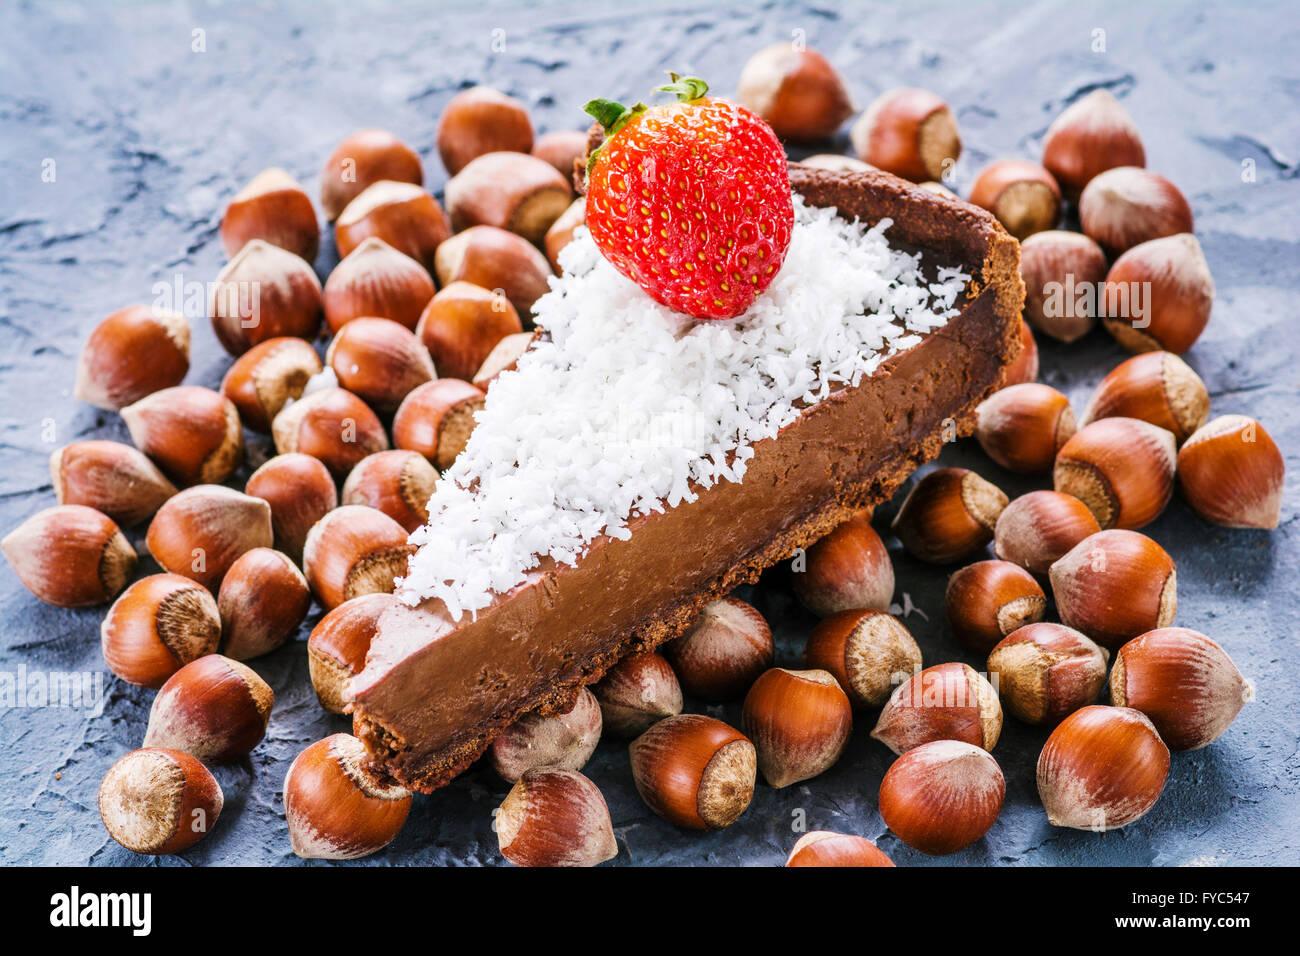 Slice of chocolate hazelnut mousse tart / chocolate pie decorated with coconut flakes and strawberry. Selective focus Stock Photo